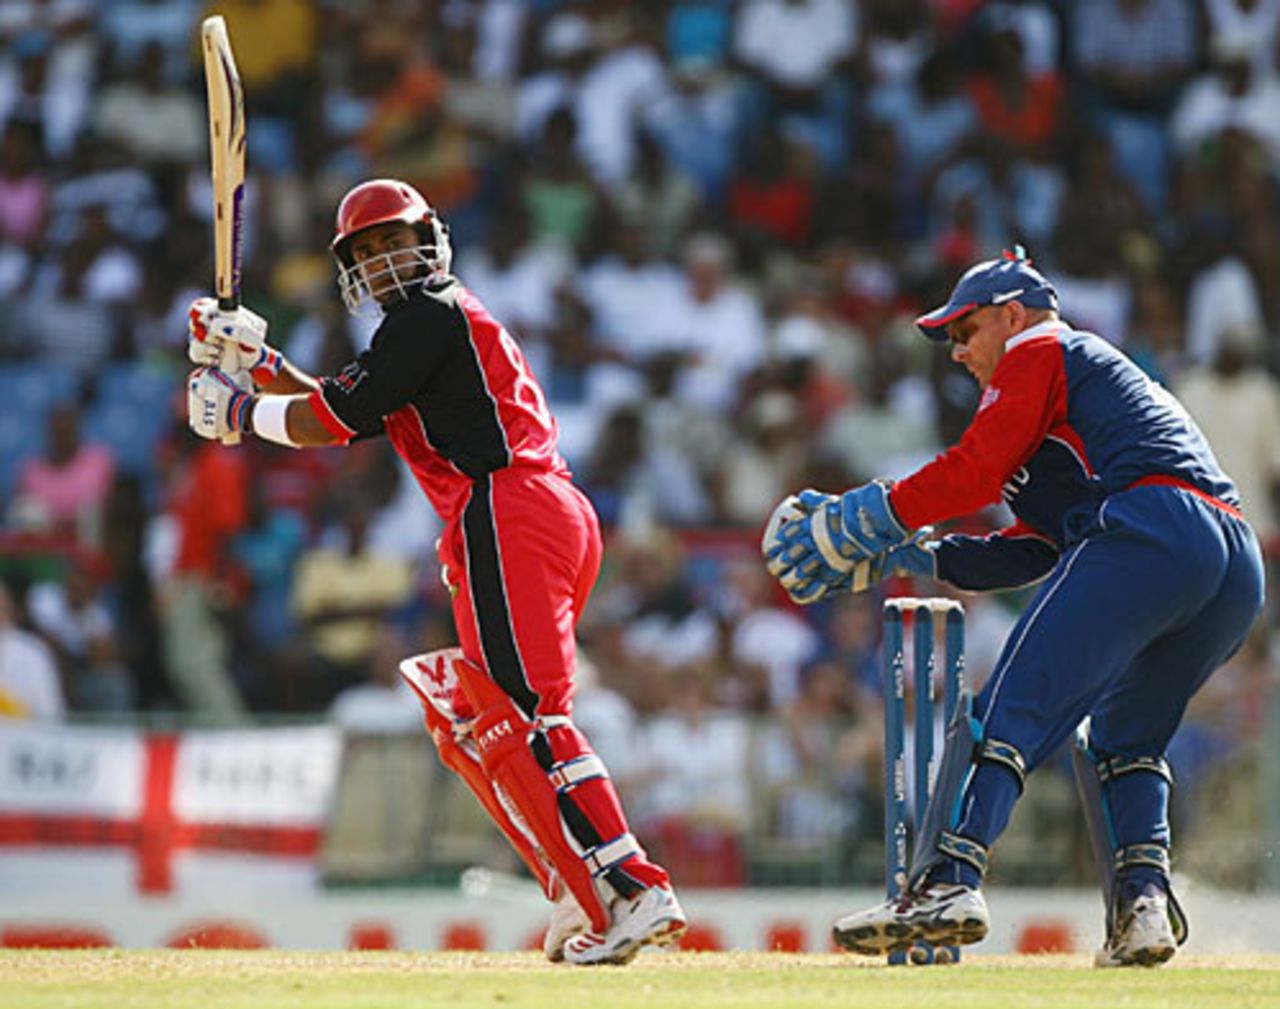 Ashif Mulla flicks one fine during his fifty, Canada v England, Group C, St Lucia, March 18, 2007